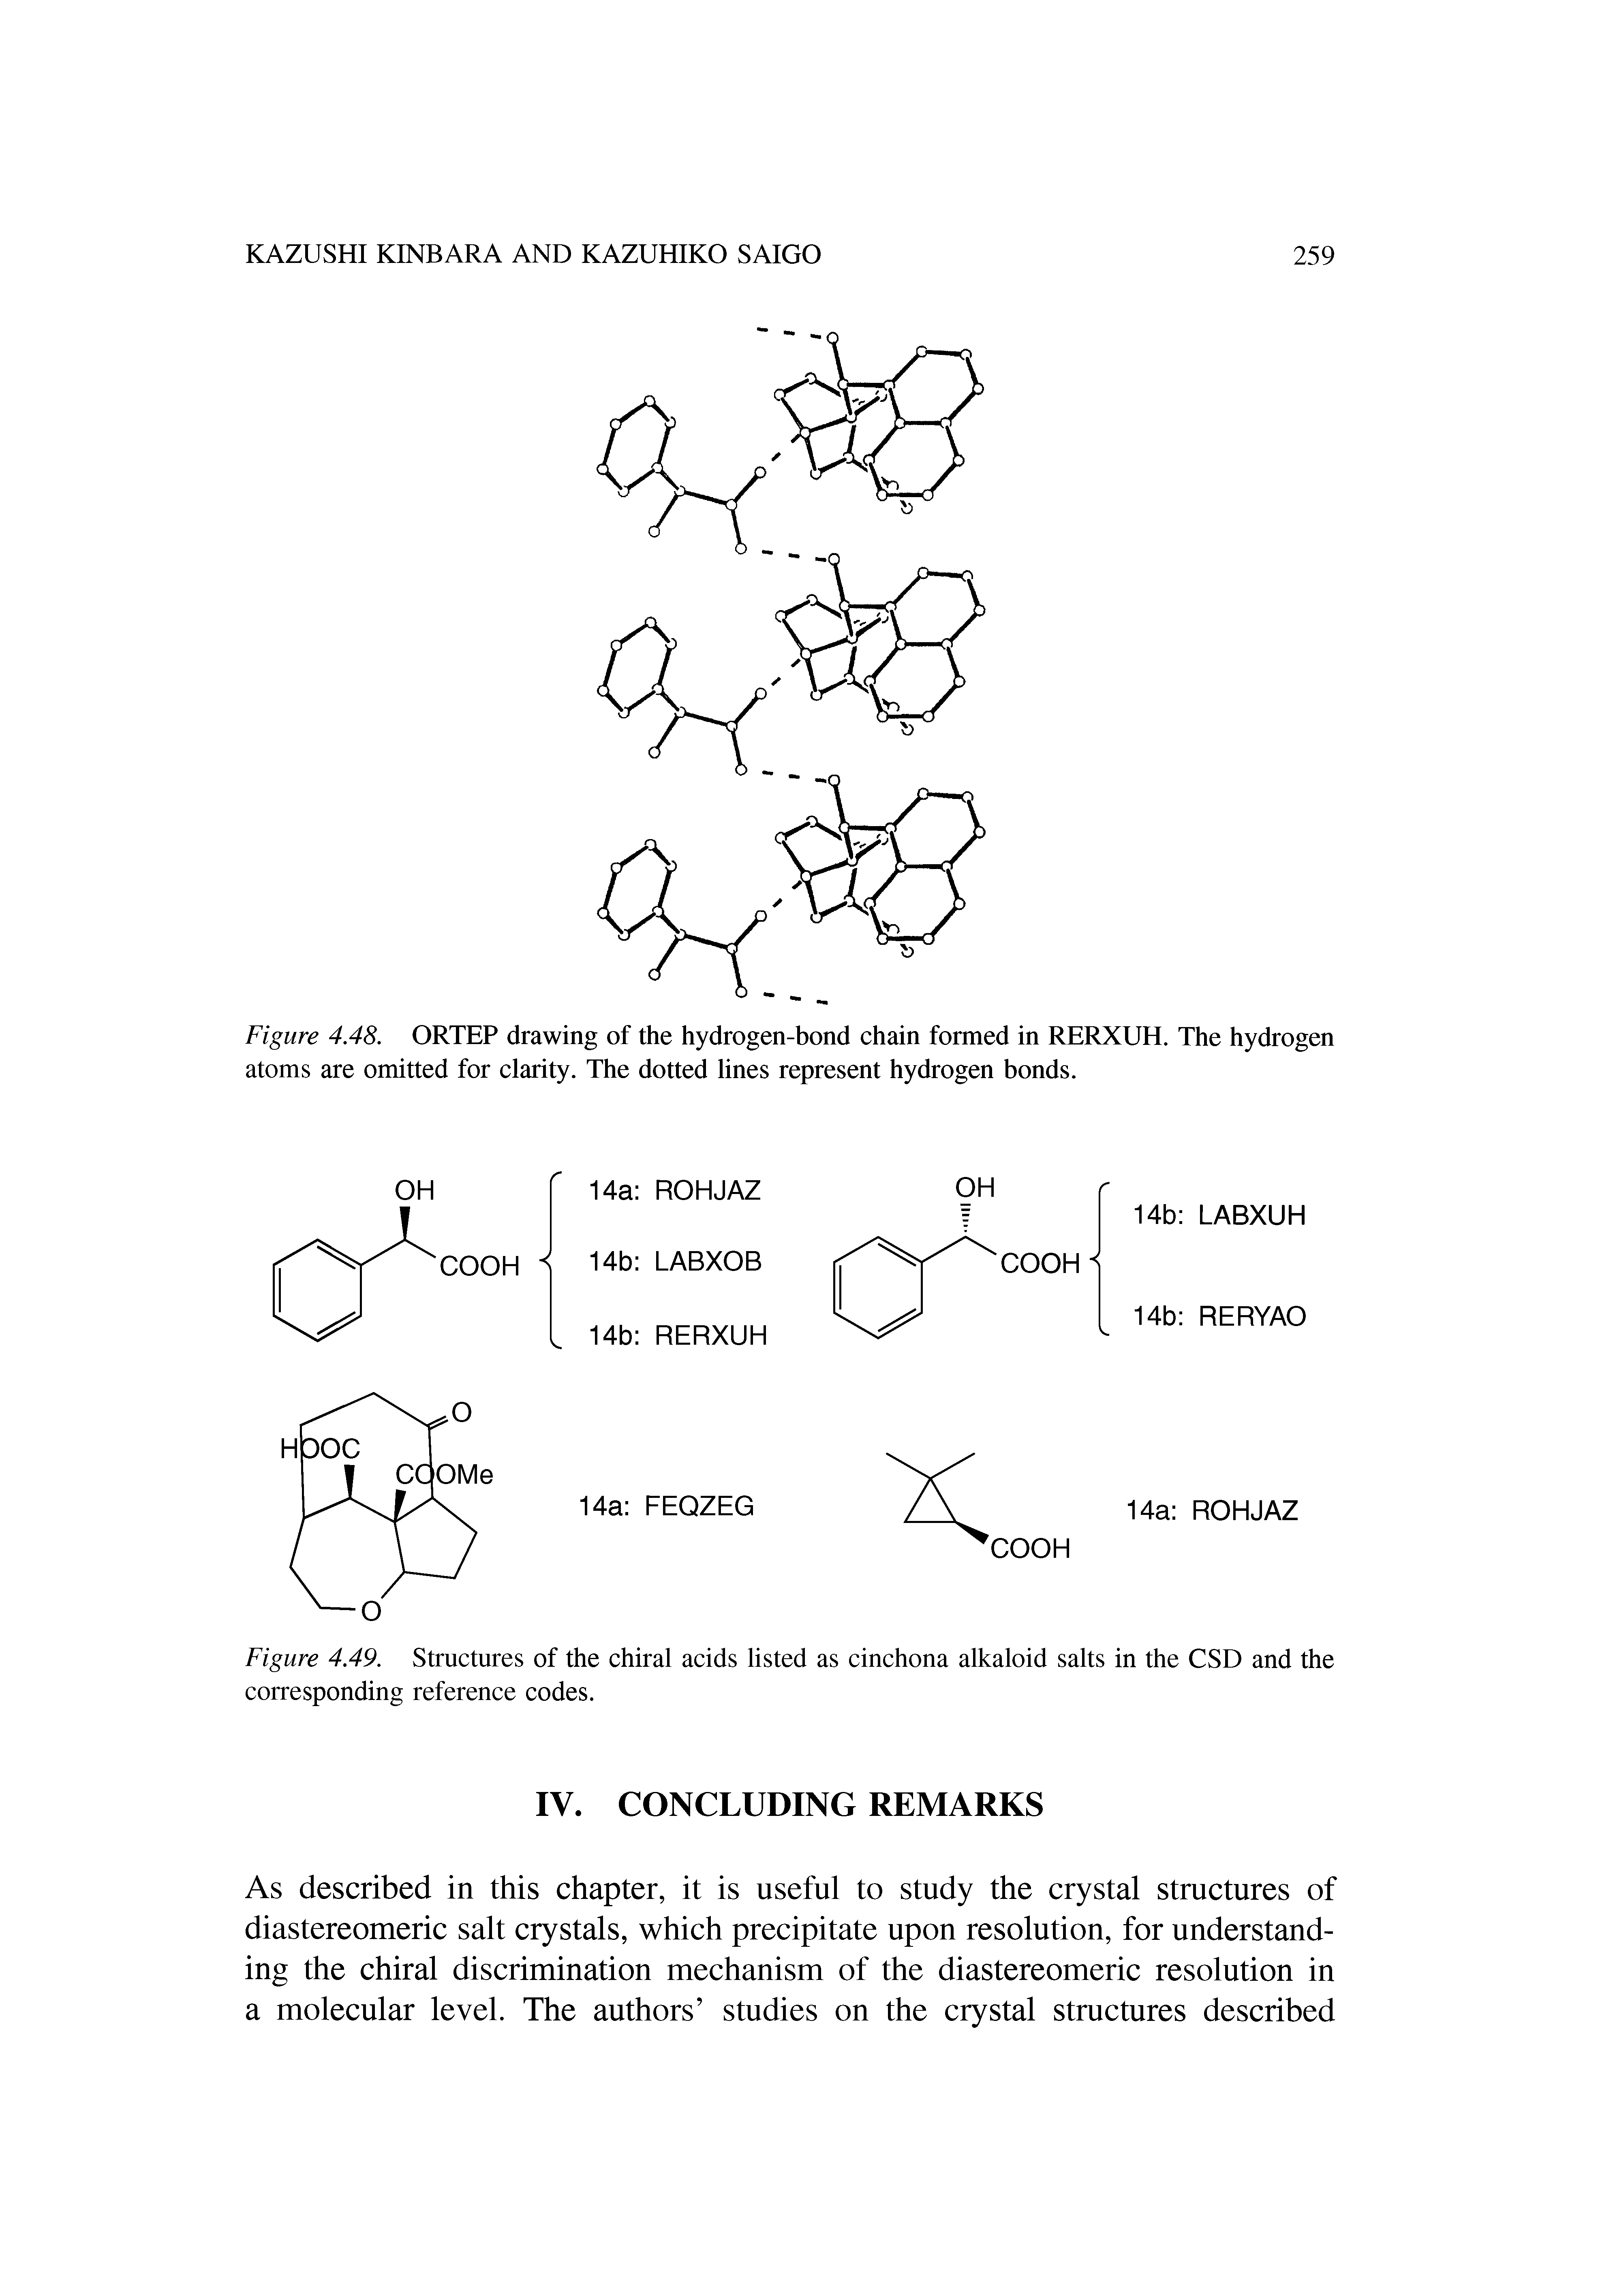 Figure 4.49. Structures of the chiral acids listed as cinchona alkaloid salts in the CSD and the corresponding reference codes.